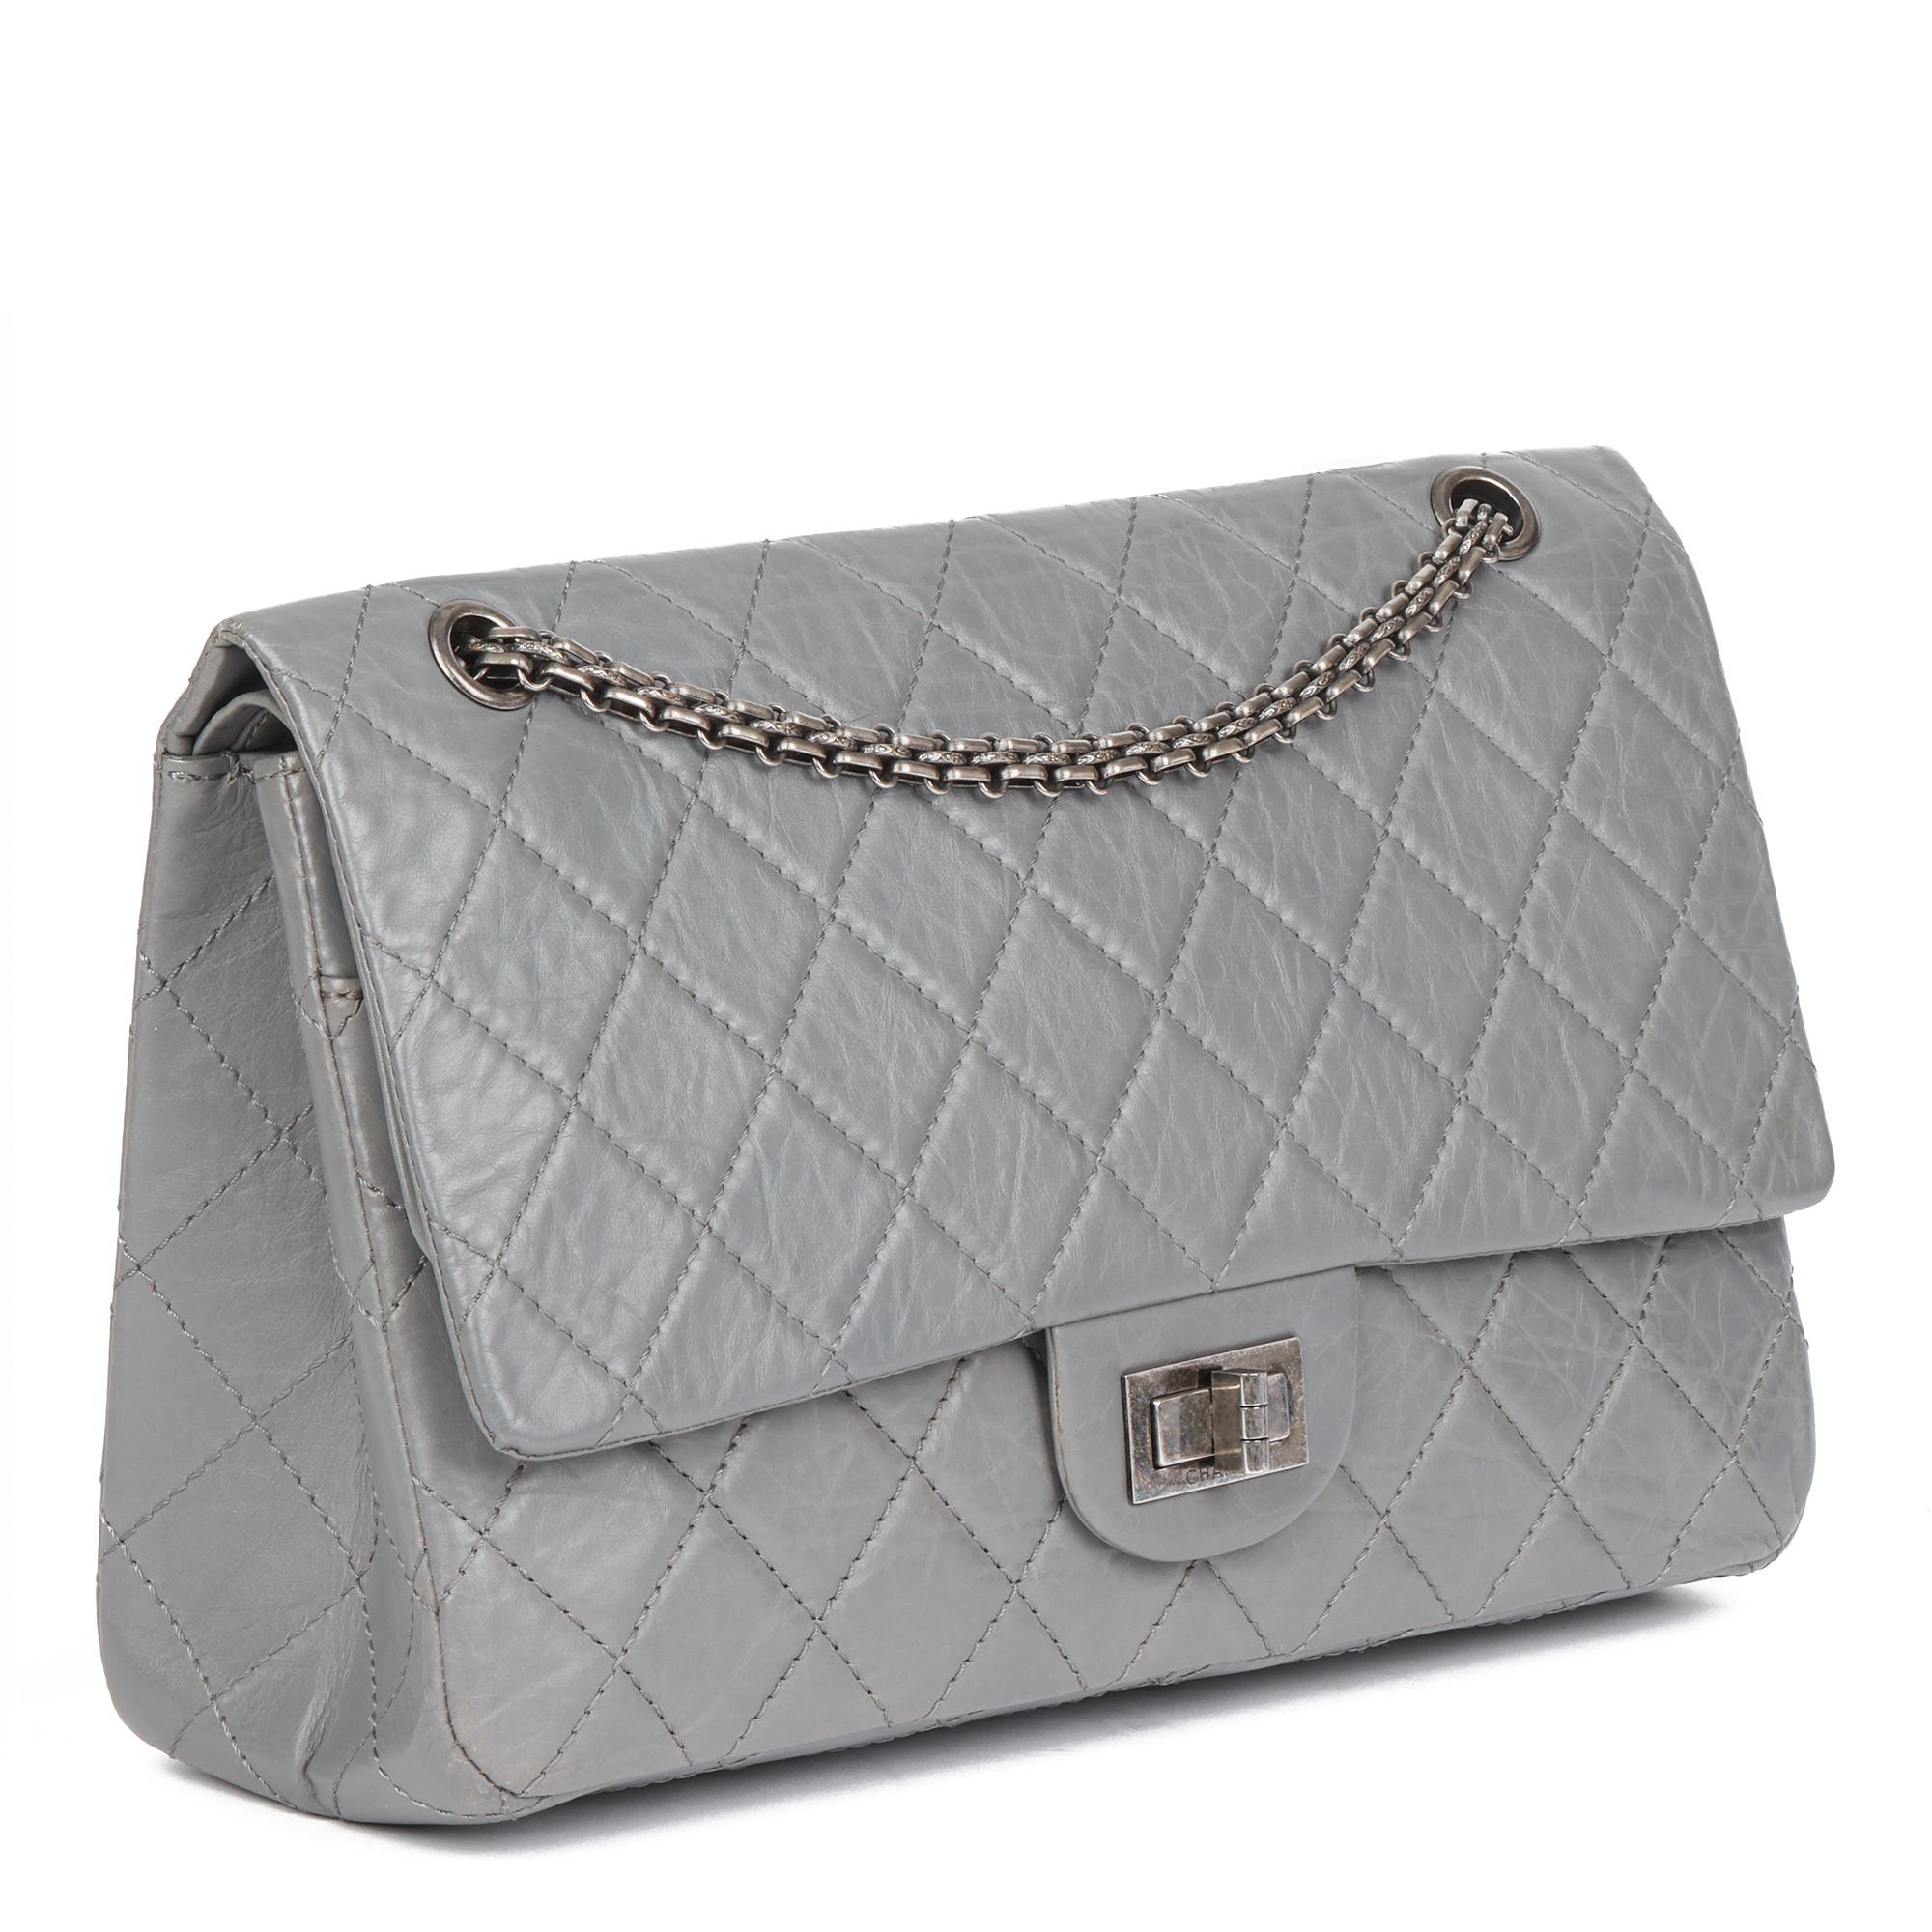 Chanel Grey Aged Quilted Calfskin Leather 227 2.55 Reissue Flap Bag 2